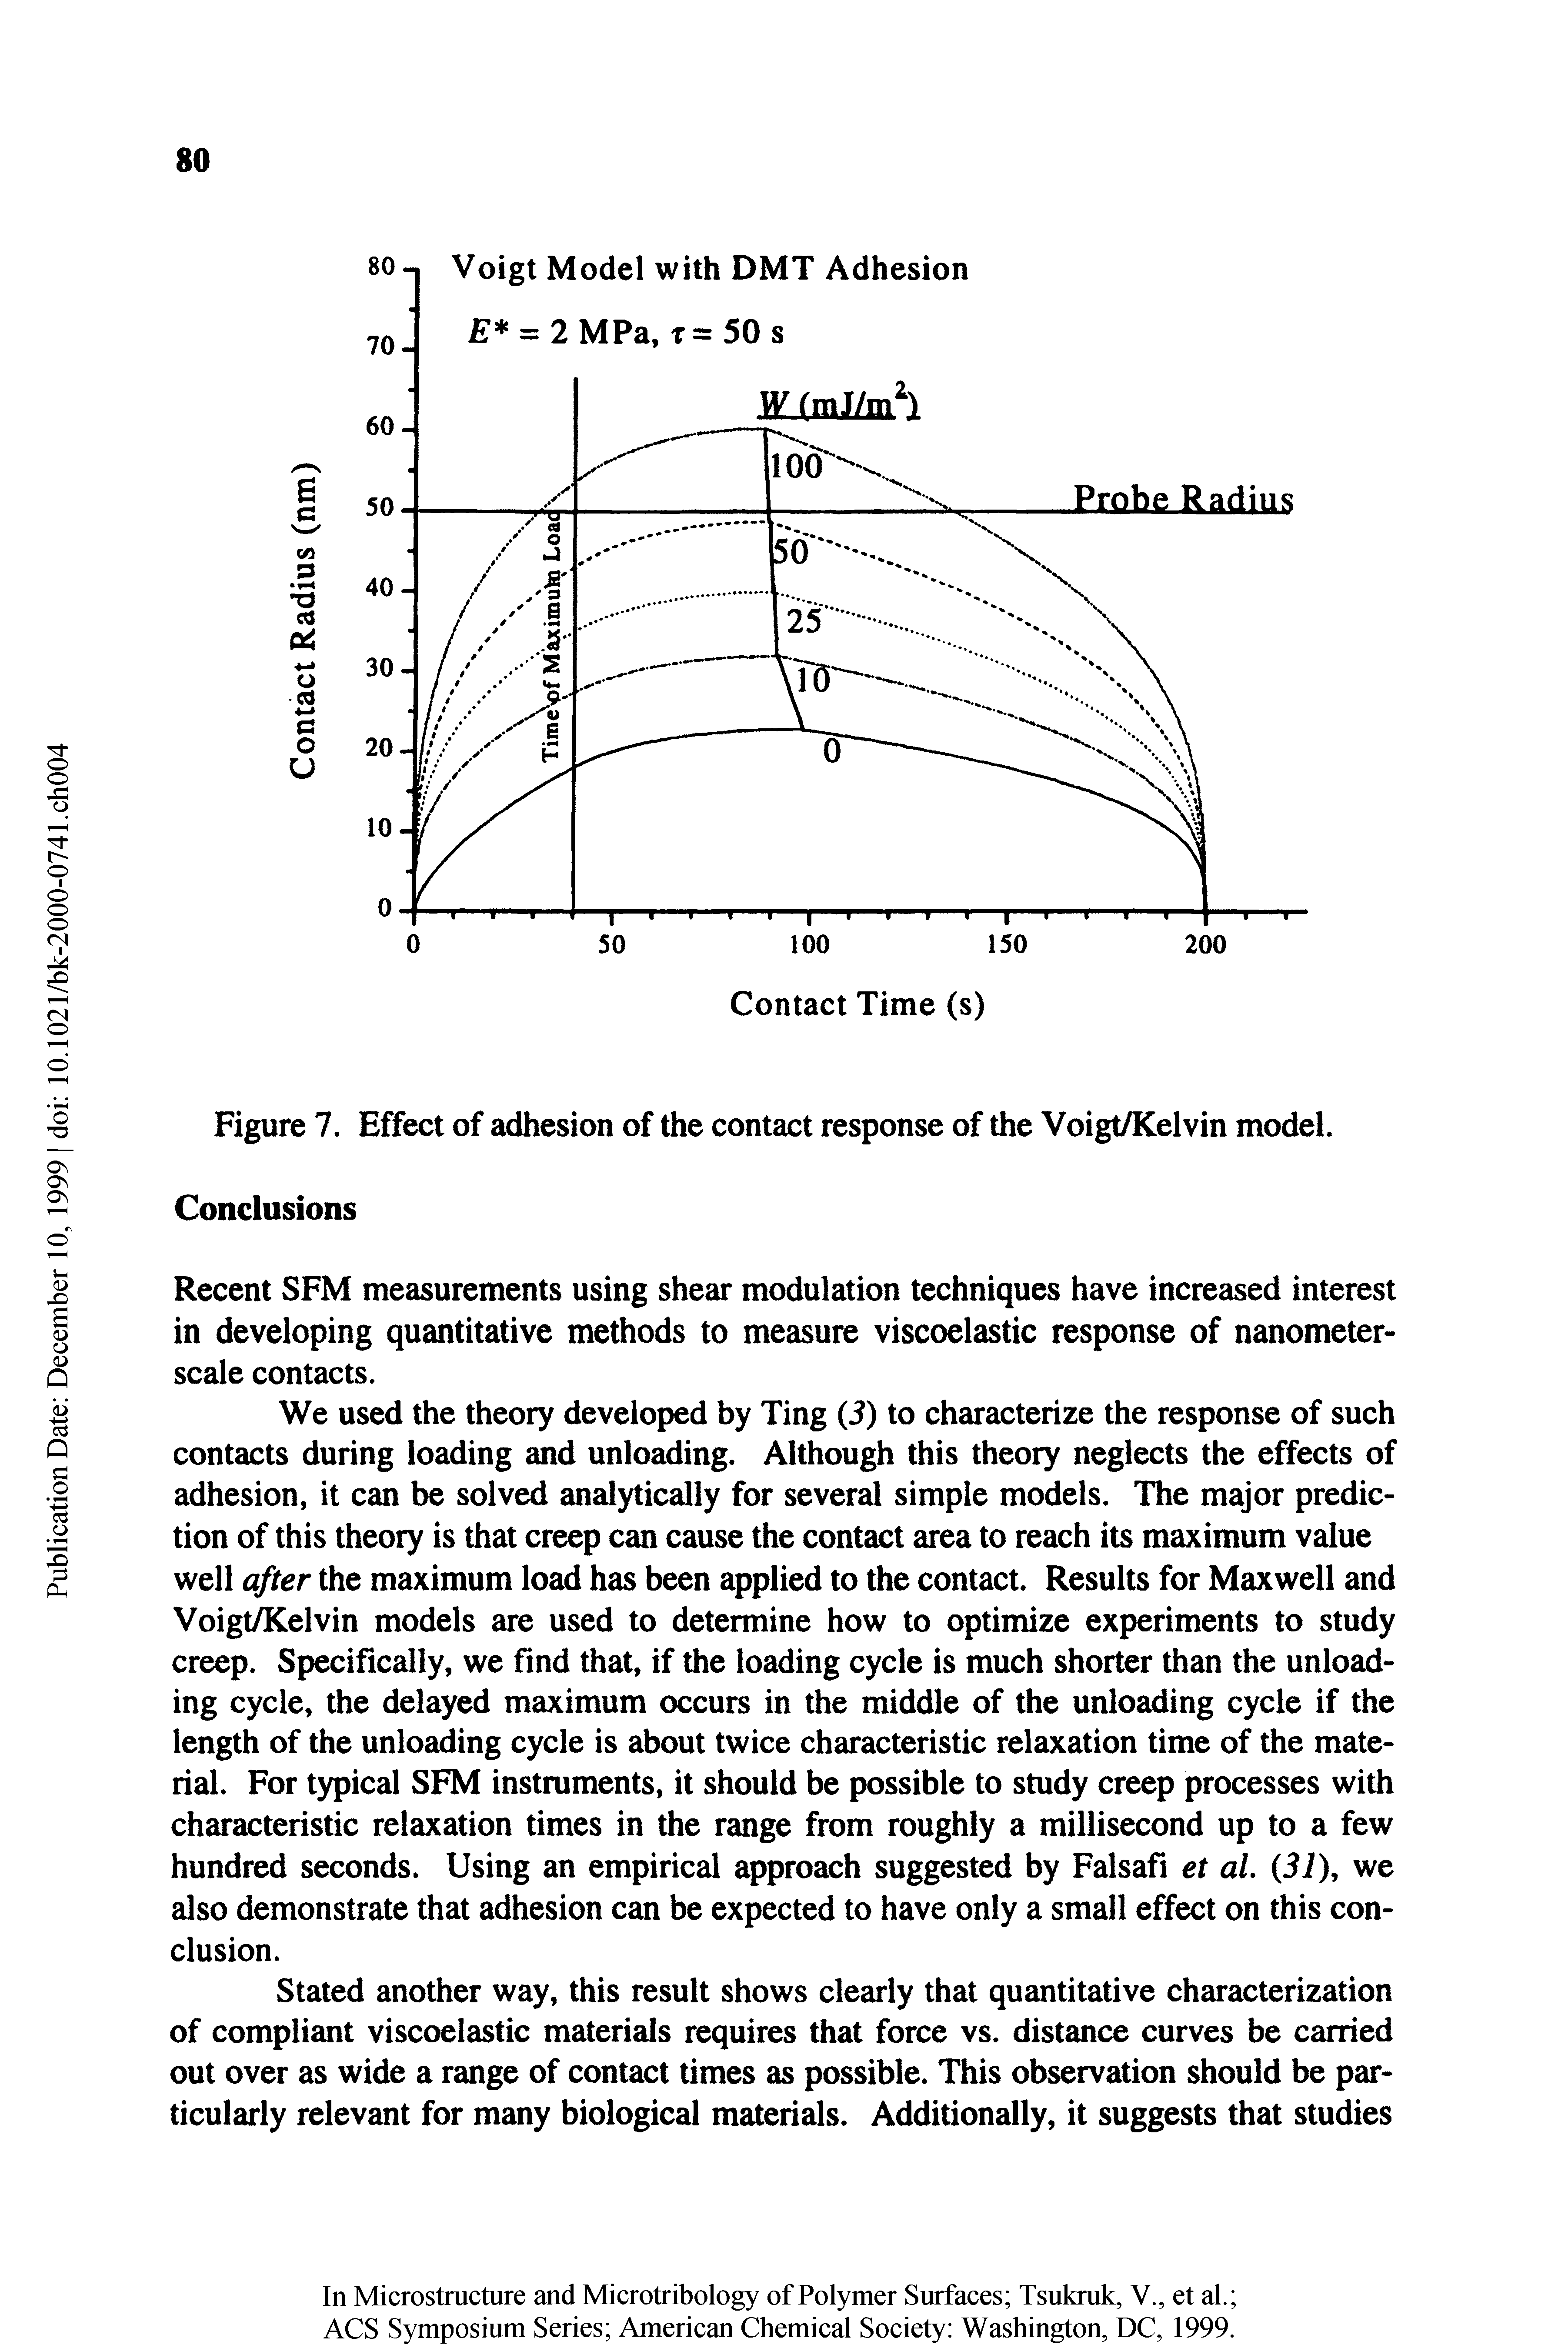 Figure 7. Eff(K t of adhesion of the contact response of the Voigt/Kelvin model.